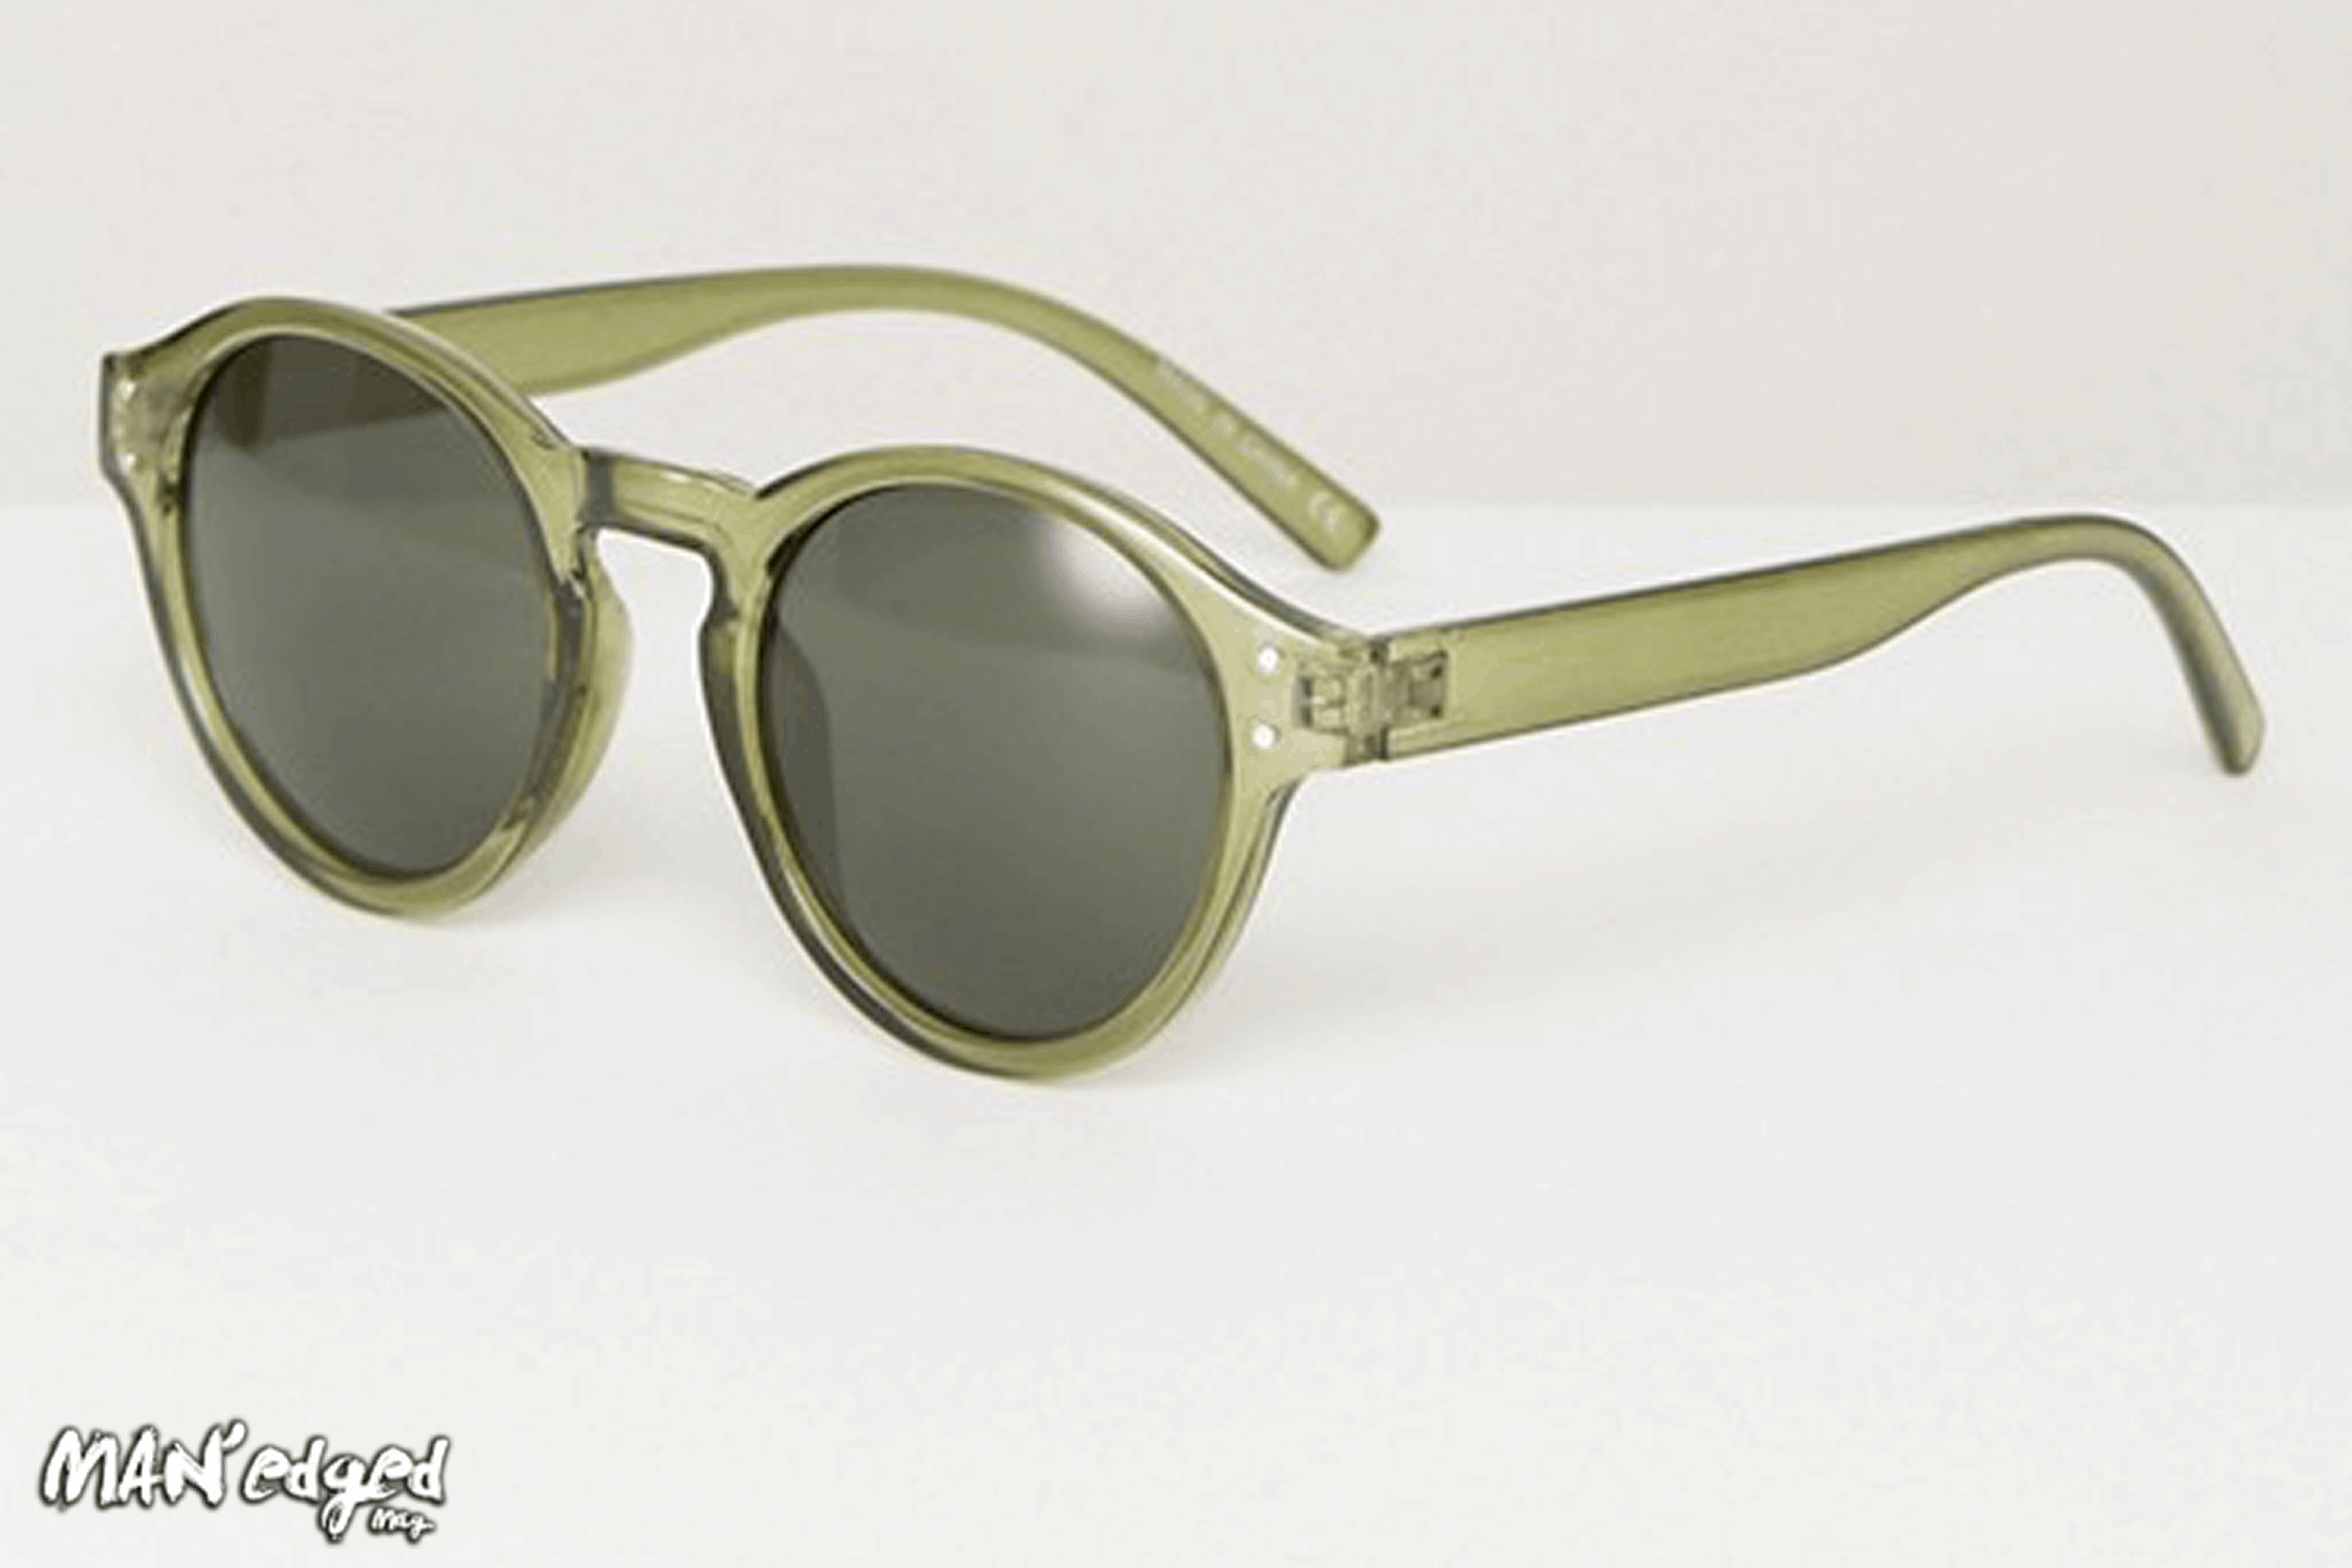 Green men's sunglasses by River Island at Asos, featured in MAN'edged Magazine St Patricks Day men's style round up